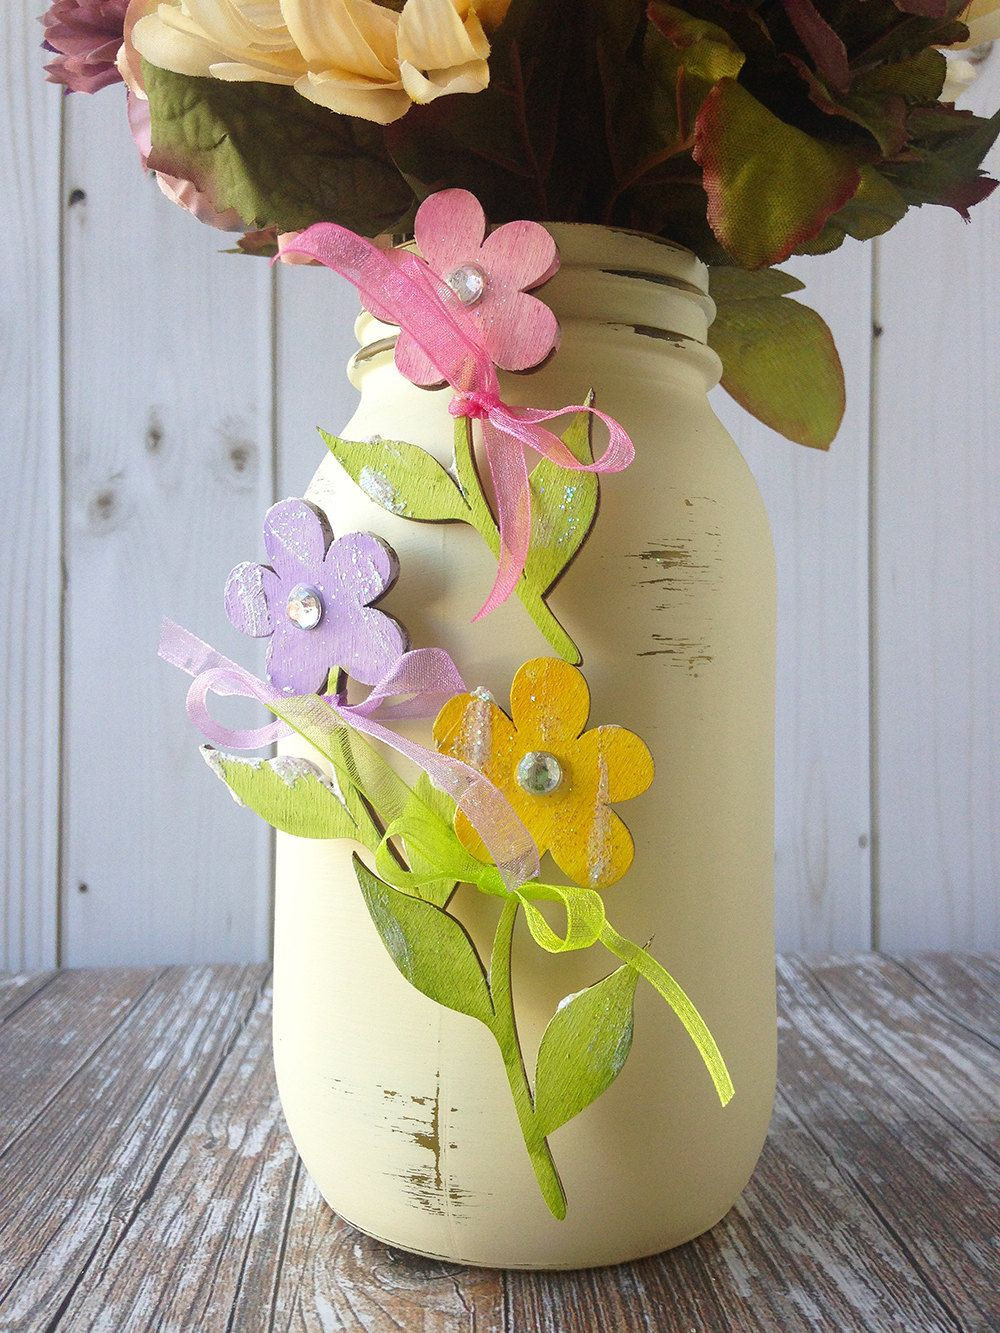 18 Ideal Tall Glass Tube Vase 2024 free download tall glass tube vase of wood and glass vase image glass home decor best d dkbrw 5743 1h inside wood and glass vase photograph wooden daisy charms mason jar decor set of 3 colorful flowers